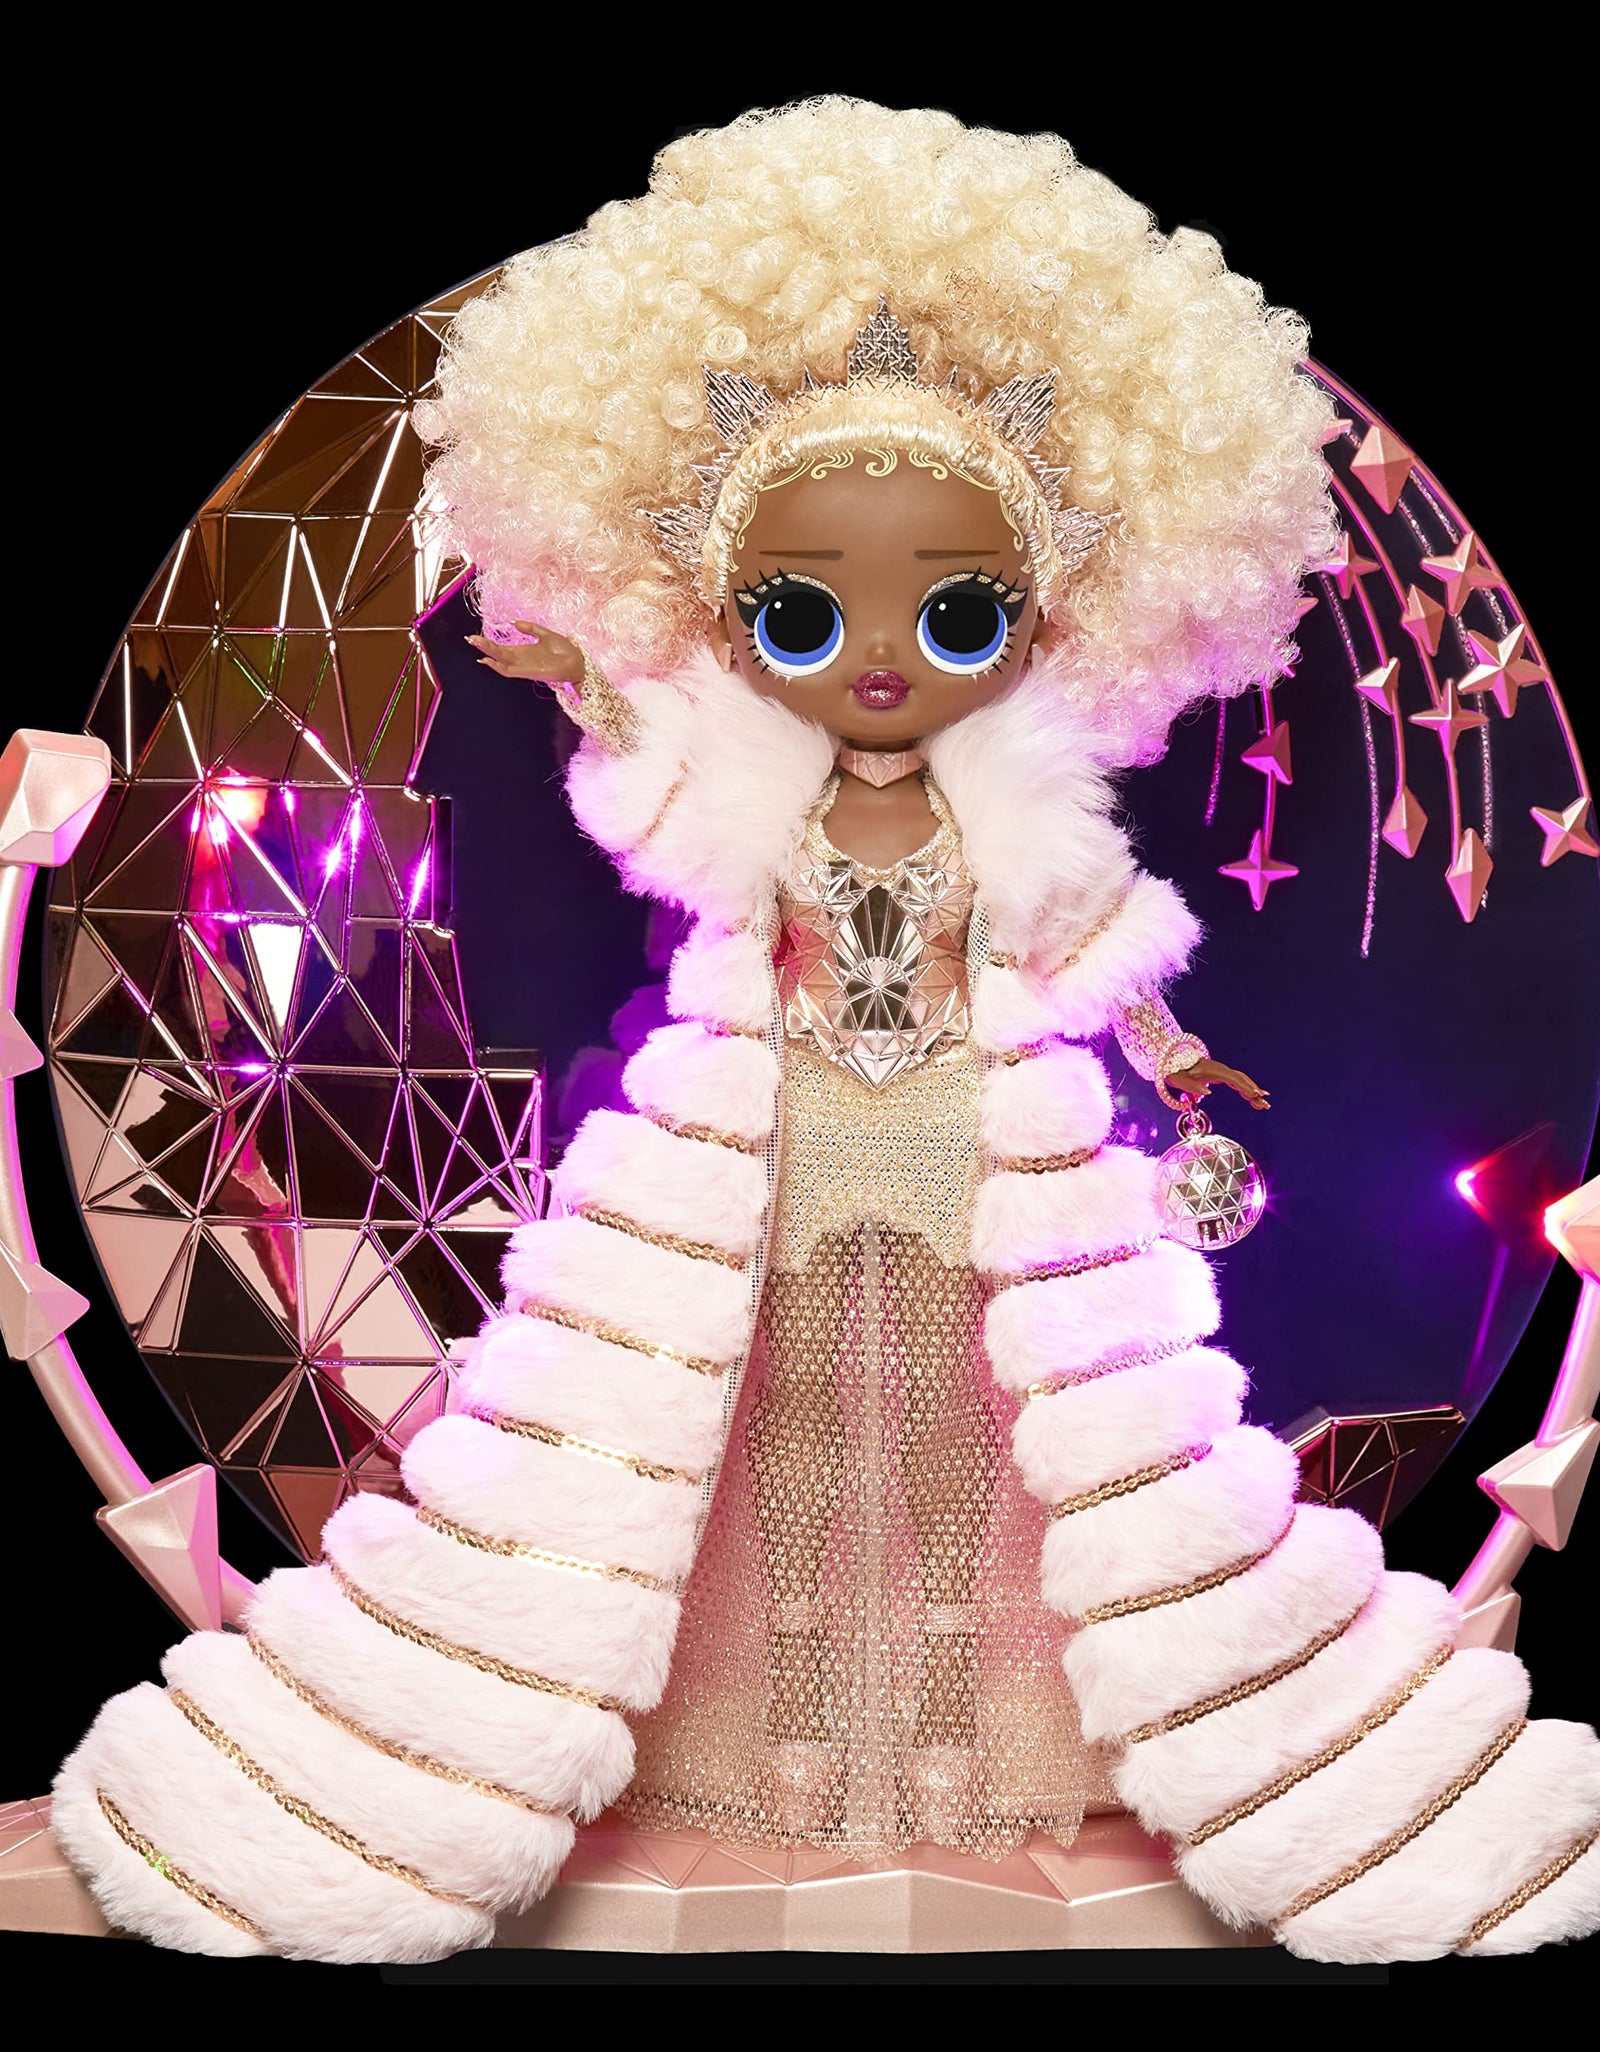 LOL Surprise Holiday OMG 2021 Collector NYE Queen Fashion Doll with Gold Fashions, Accessories, New Year's Celebration Outfit, Light Up Stand– Gift for Kids & Collectors, Toys for Girls Ages 4 5 6 7+